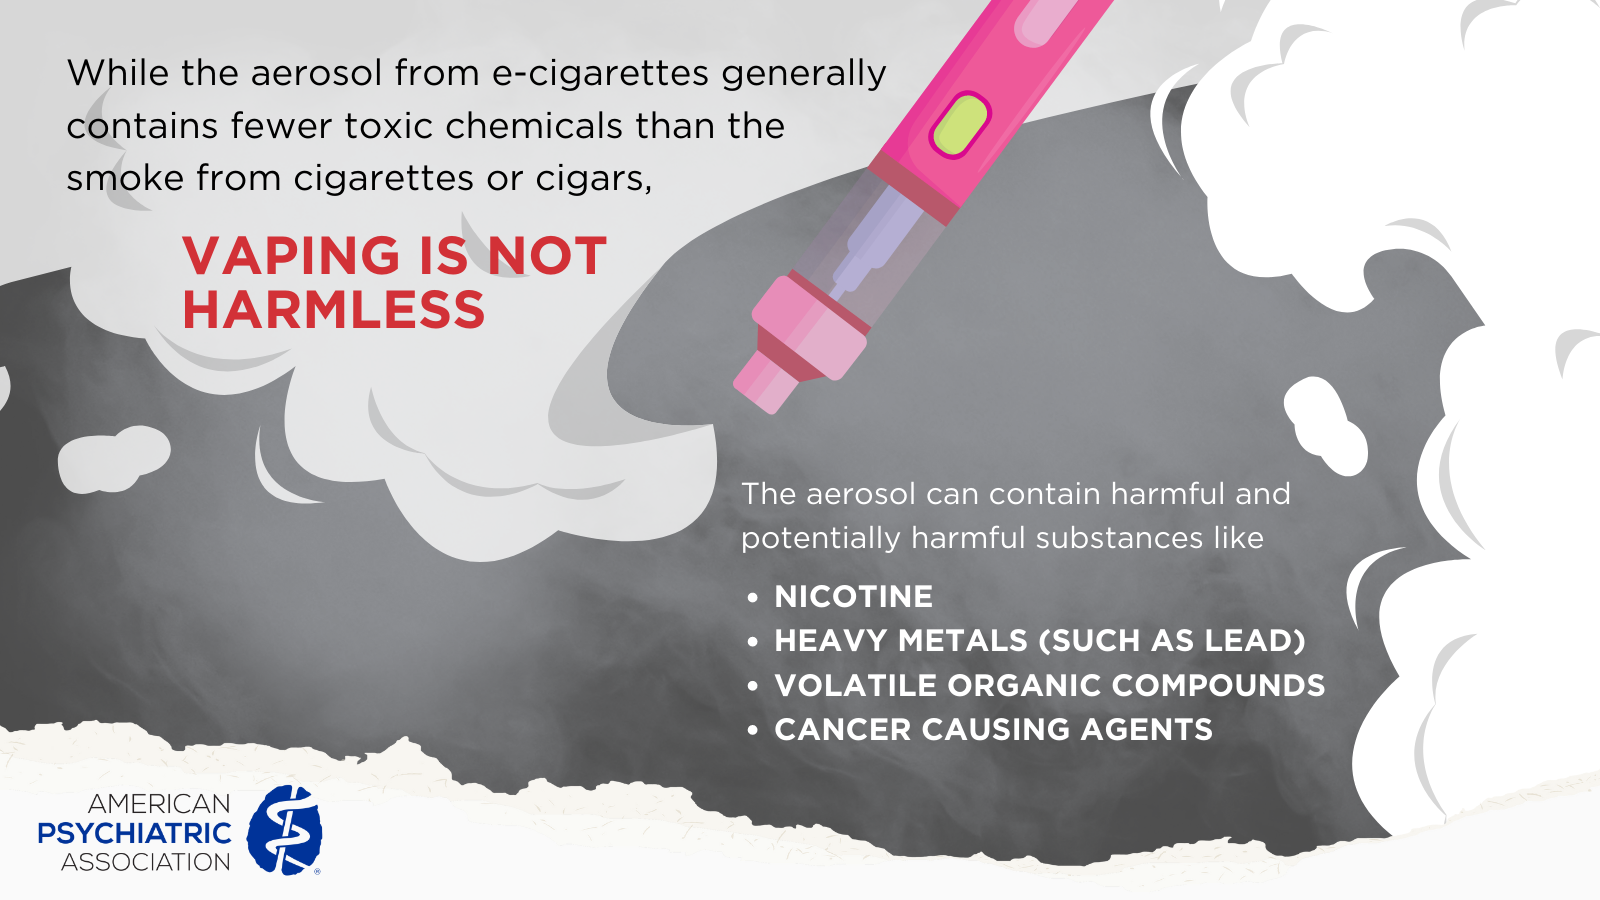 Vaping is not harmless - The aerosol from e-cigarettes generally contains fewer toxic chemical than the smoke from cigaretes or cigars, it is not harmless. It can contain potentially harmful substances like nicotine, heavy metals, volatile organic compounds, and cancer causing agents.